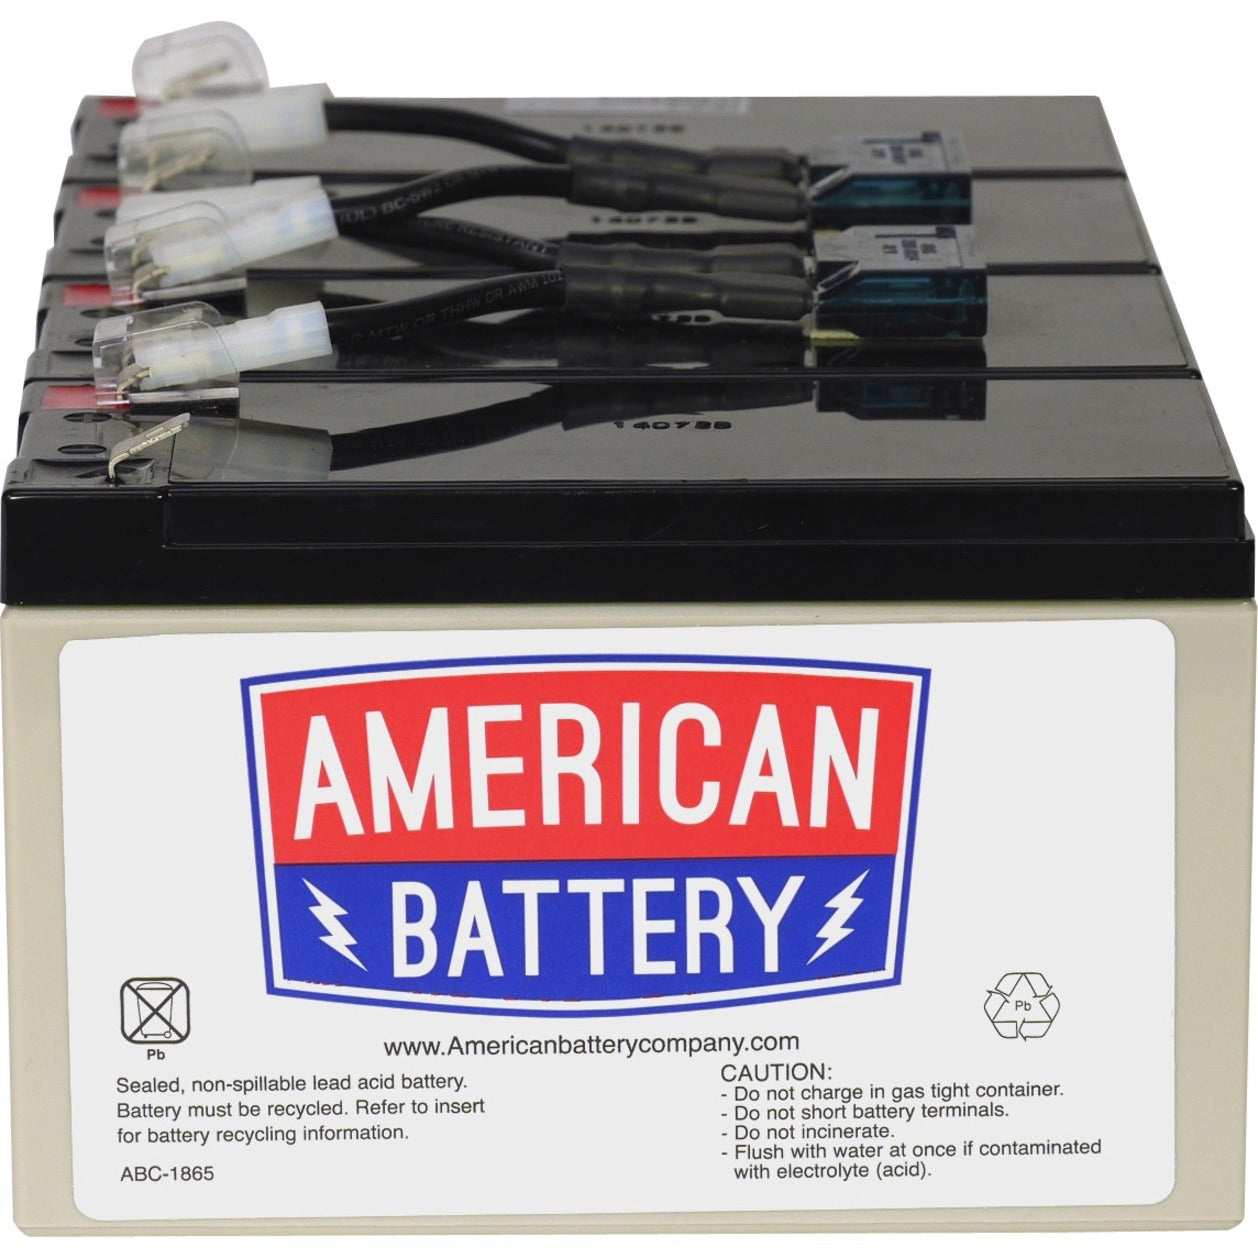 ABC RBC8 Replacement Battery Cartridge, 2 Year Warranty, Hot Swappable, 7000mAh, Lead Acid